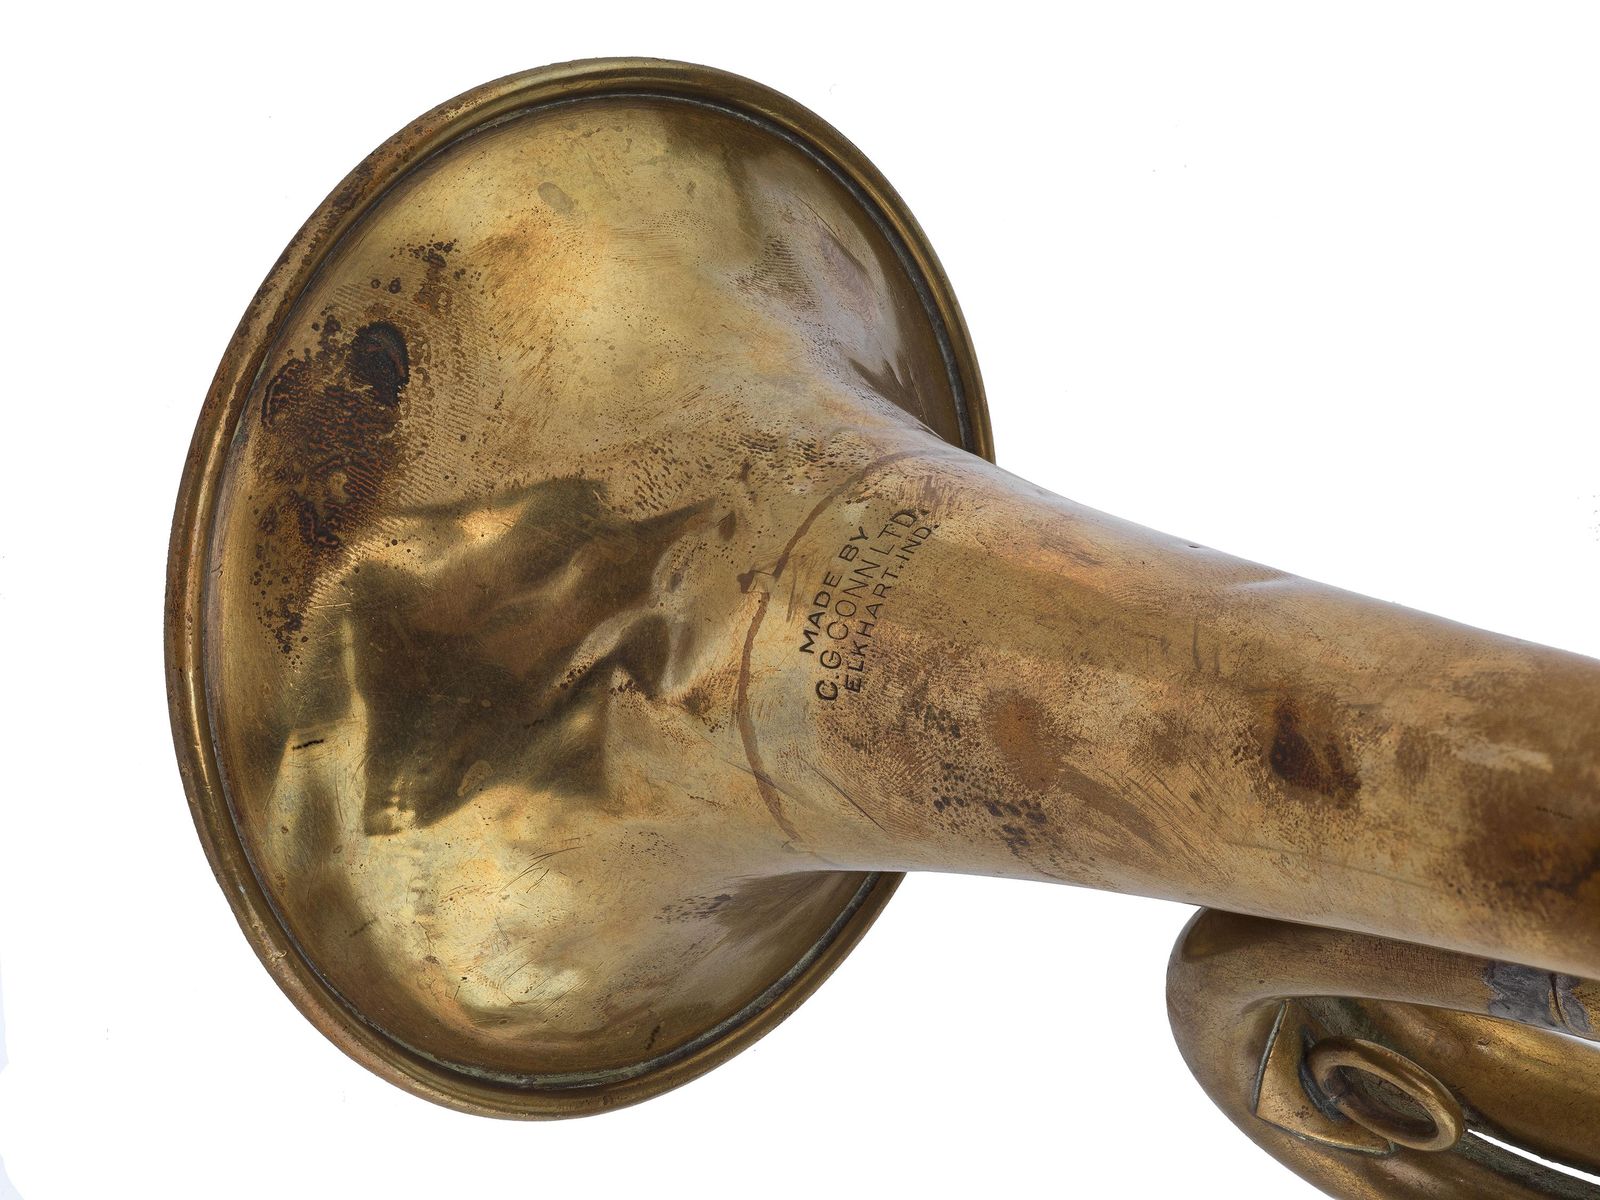 What's That Spot? Identifying Marks on Your Brass Instrument